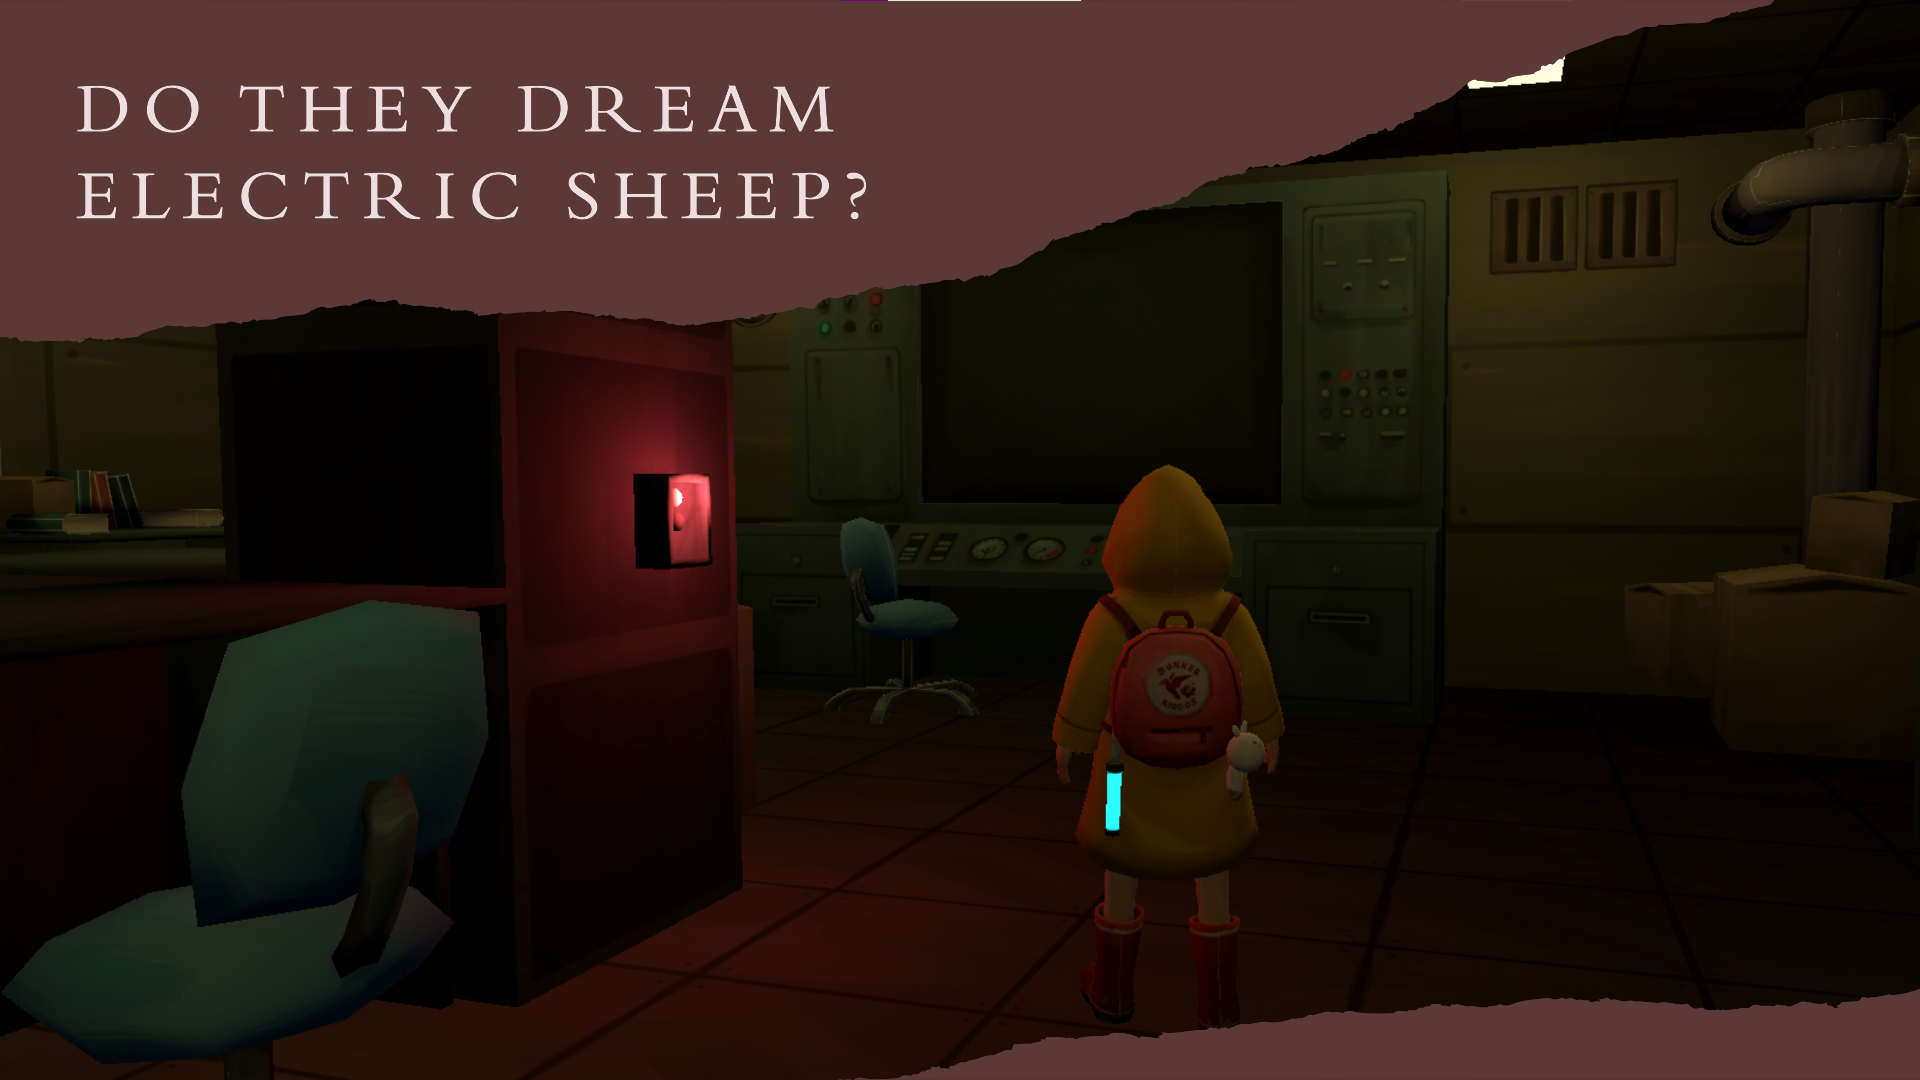 Do they dream electric sheep?